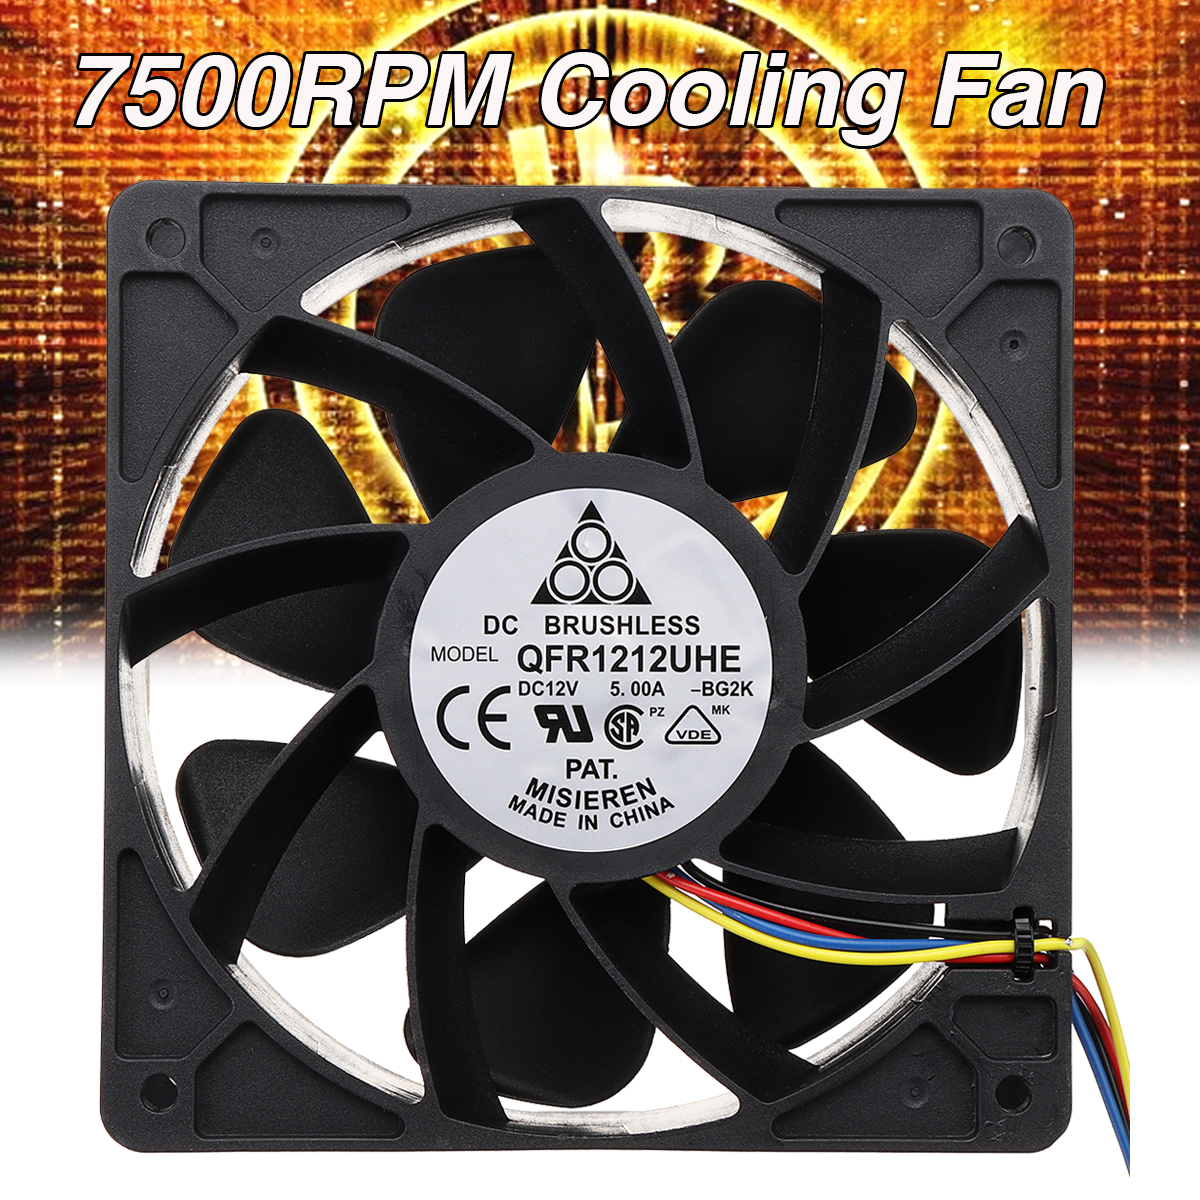 7500RPM-Cooling-Fan-4-pin-Connector-Replacement-For-Antminer-Bitmain-S7-S9-1321251-1